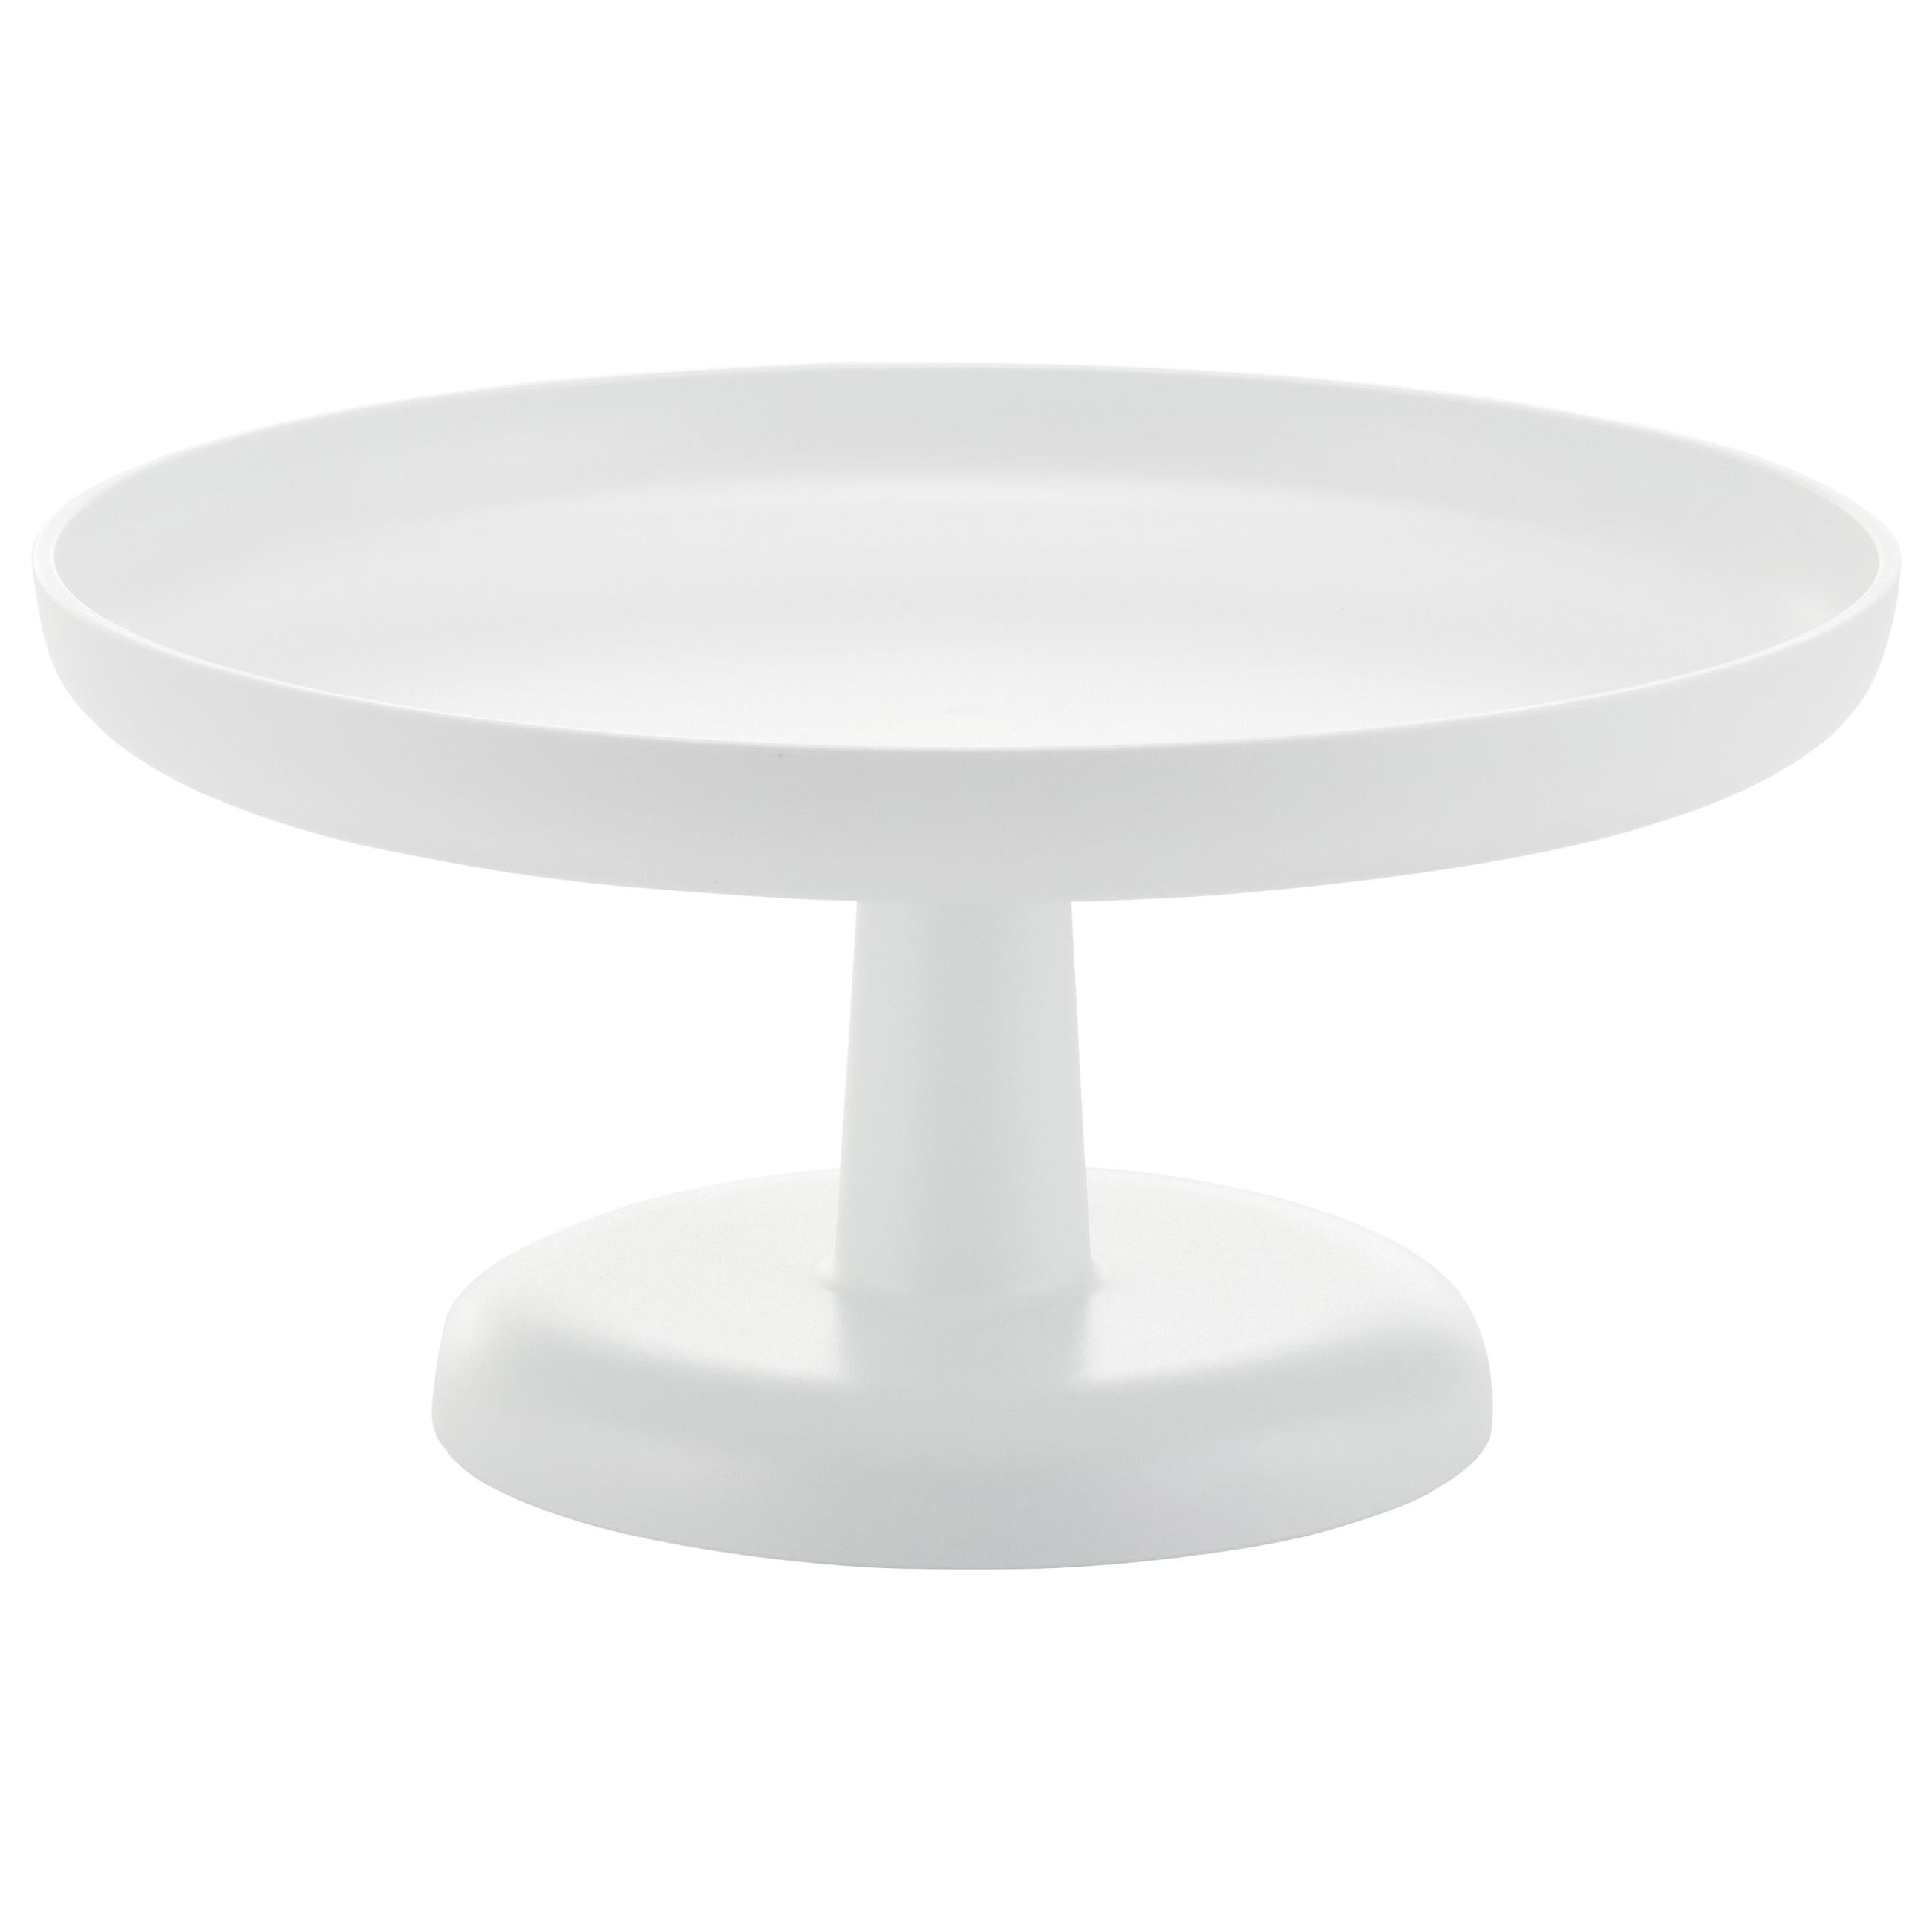 Vitra High Tray in White by Jasper Morrison For Sale